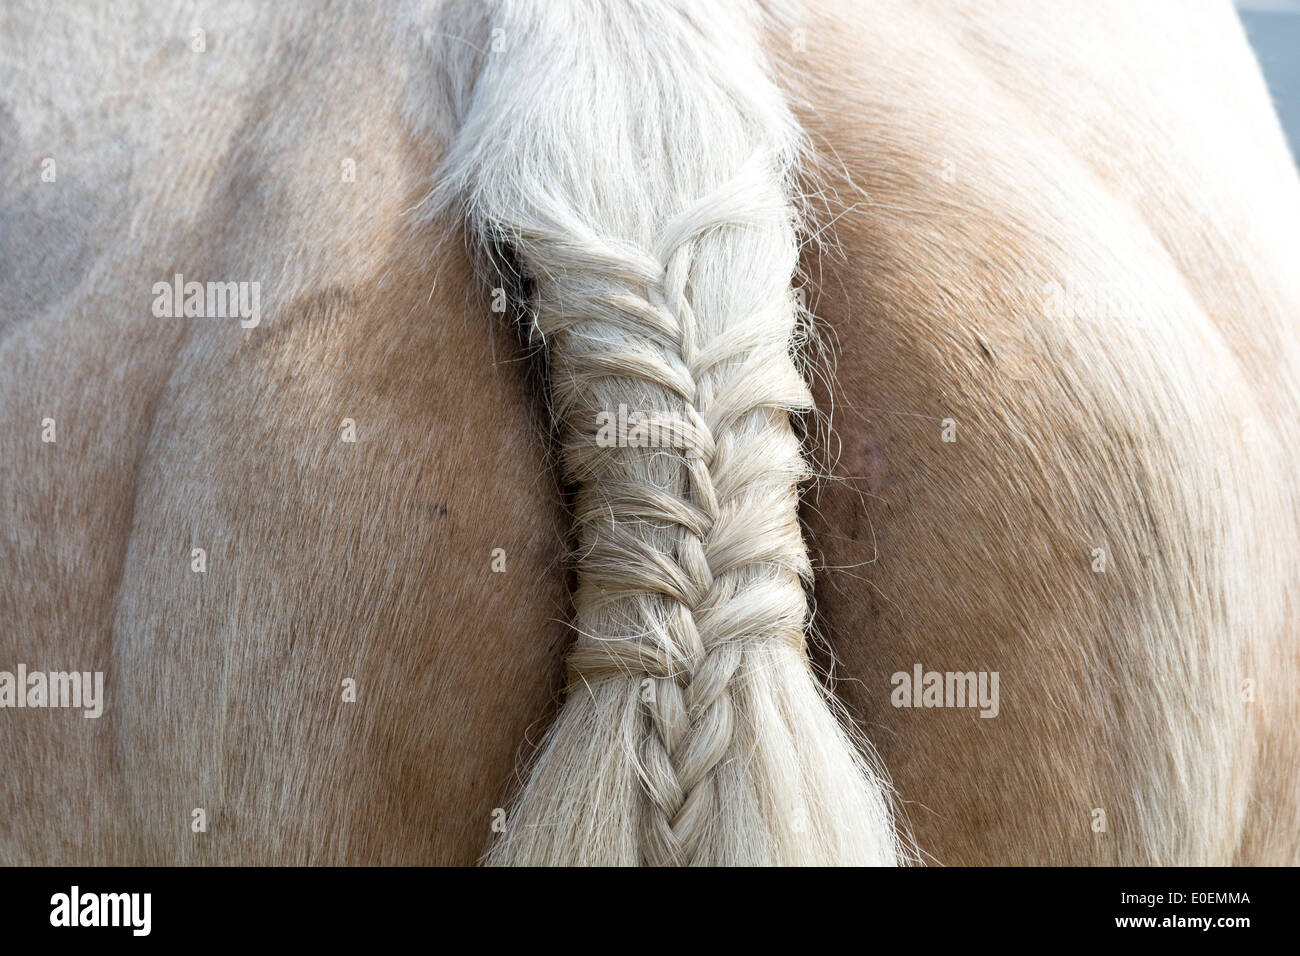 Braided tail of a Palomino horse Stock Photo